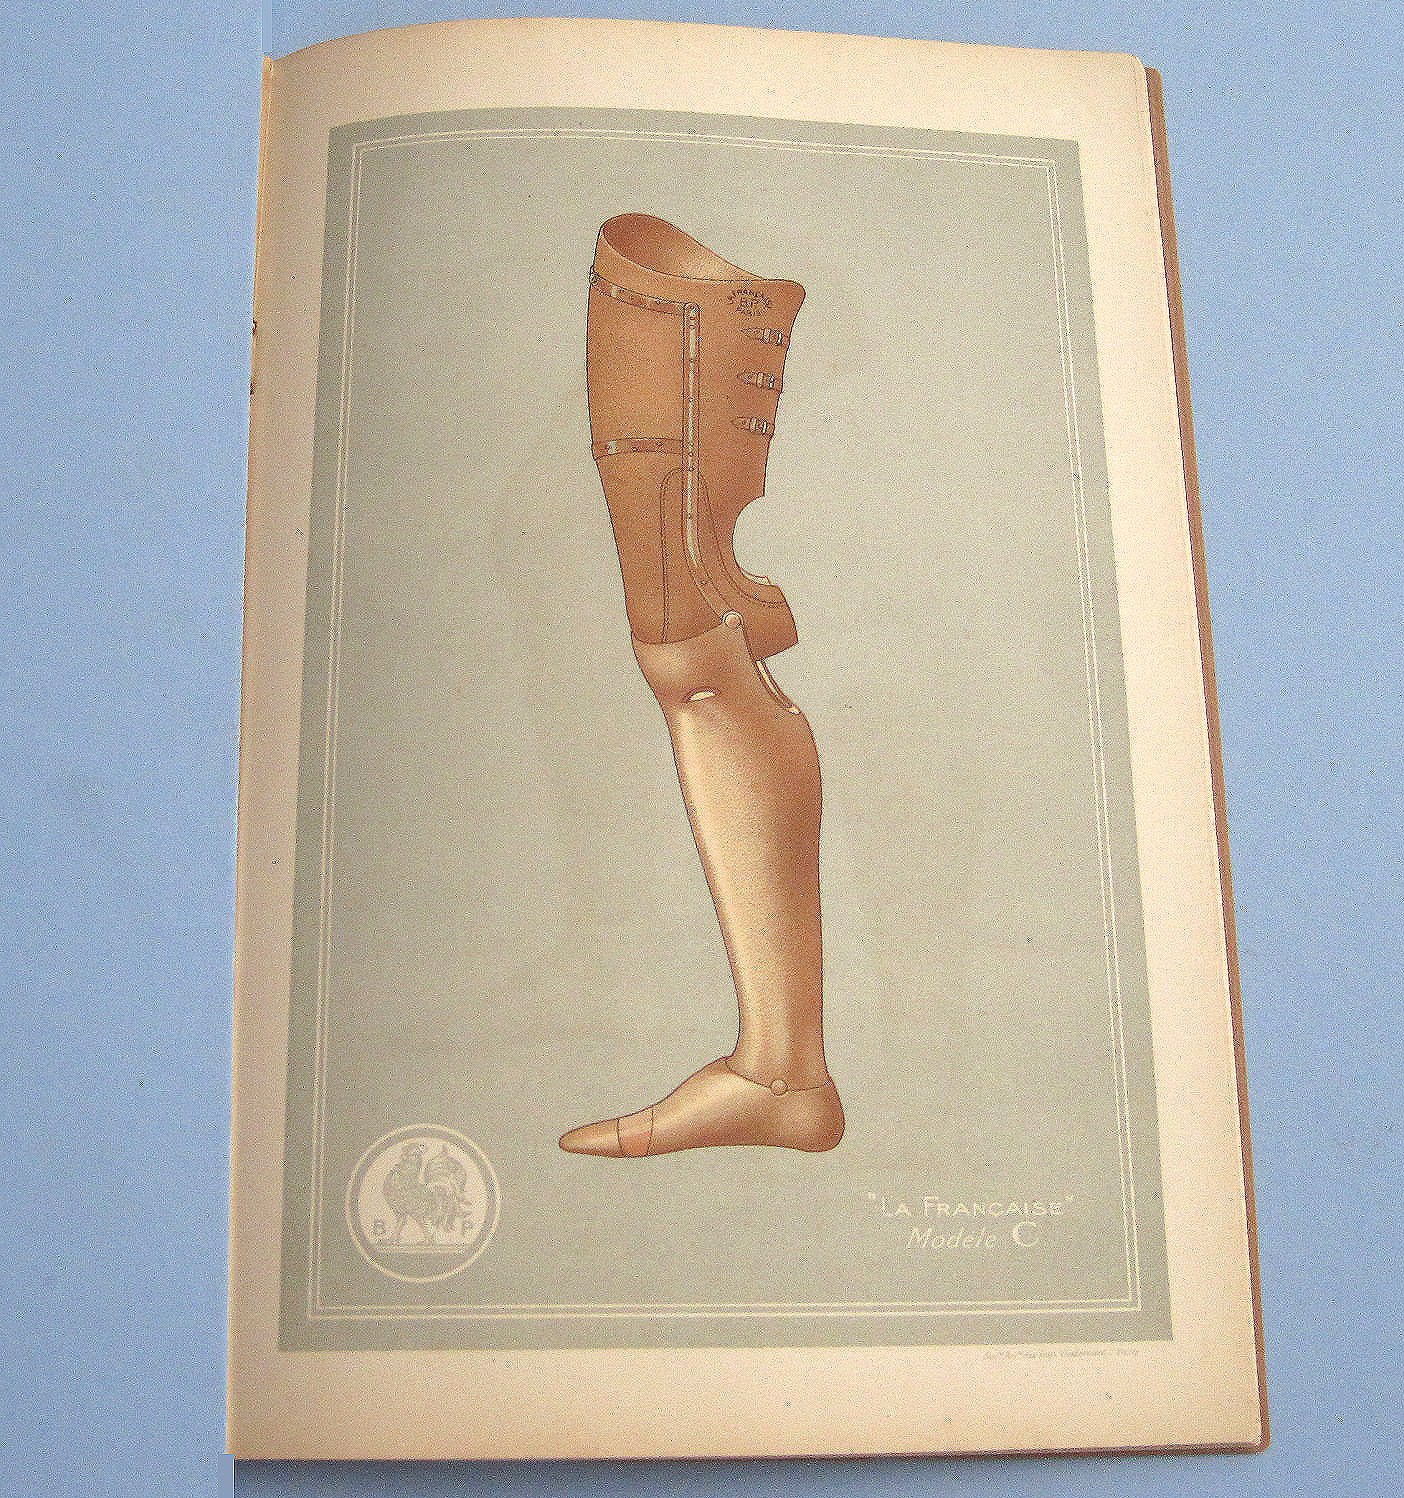 Two Early 20th c. Prostheses Catalogs